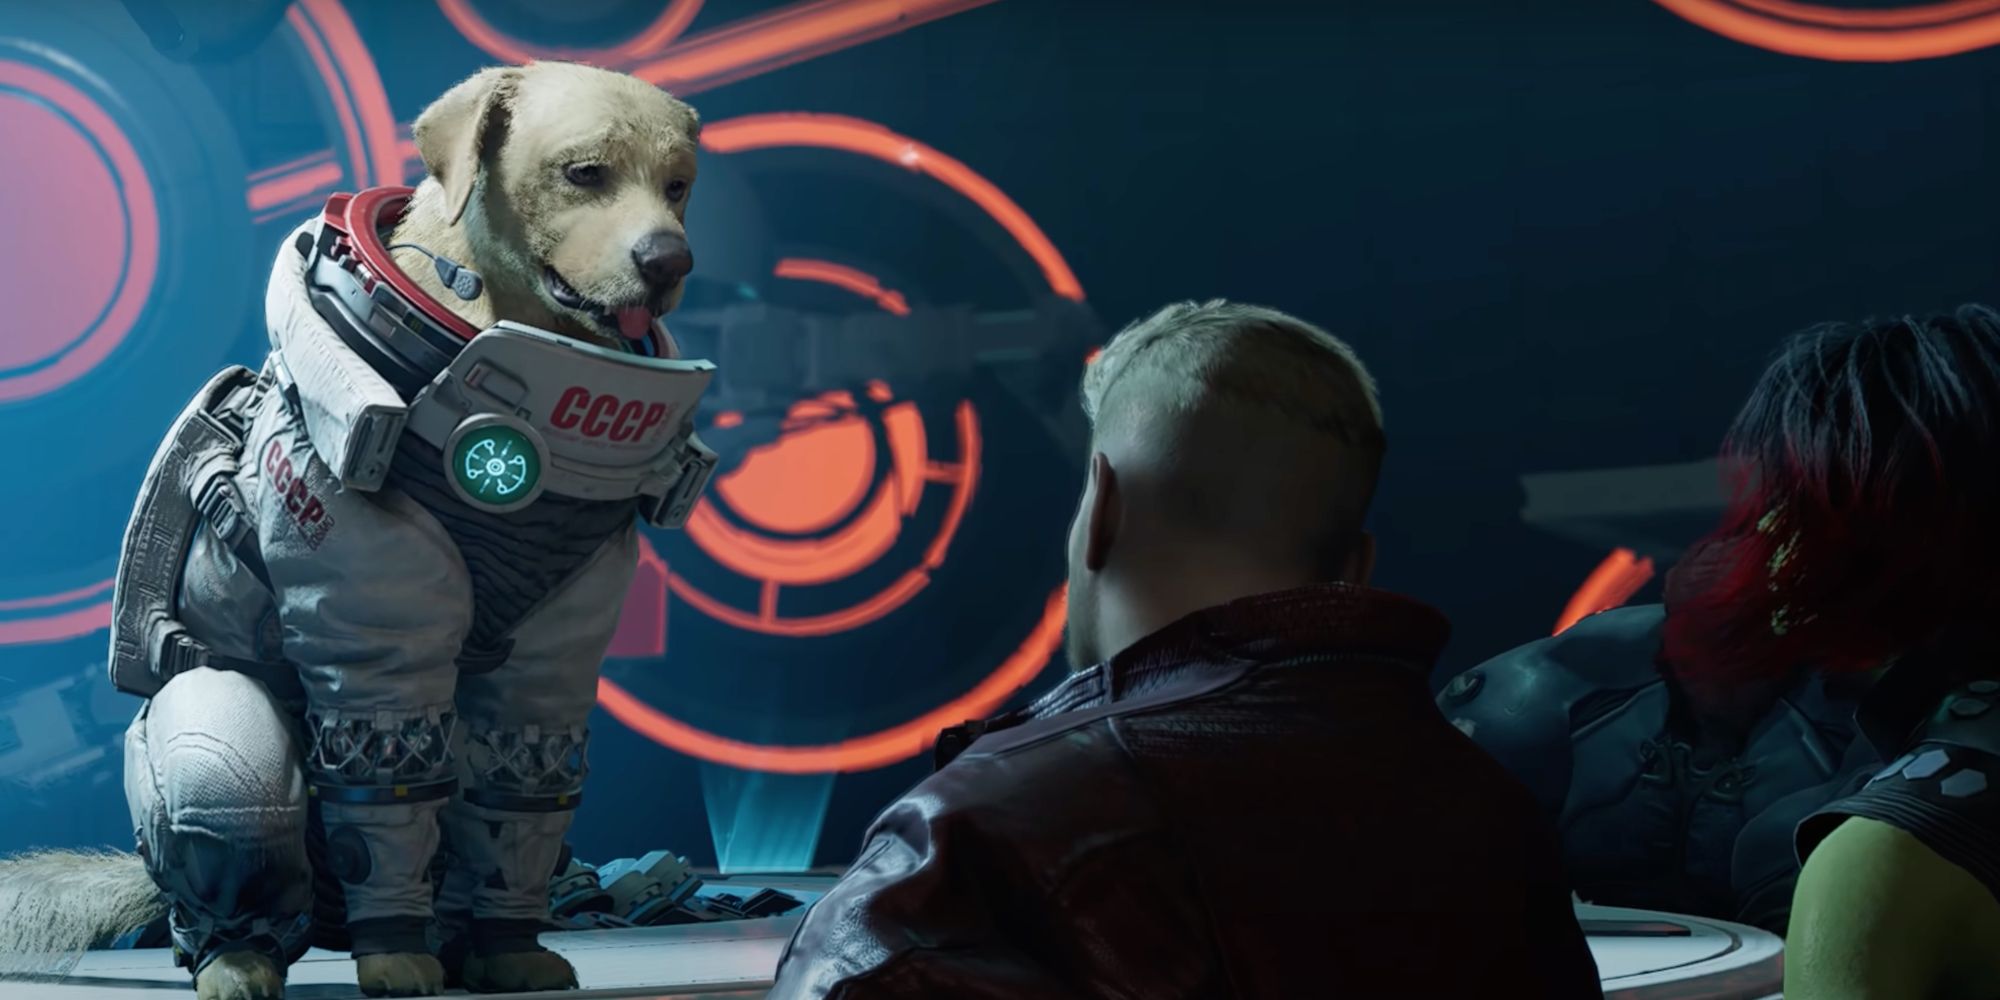 Marvel's Guardians of the Galaxy has interesting gameplay mechanics that can be iterated on in a sequel